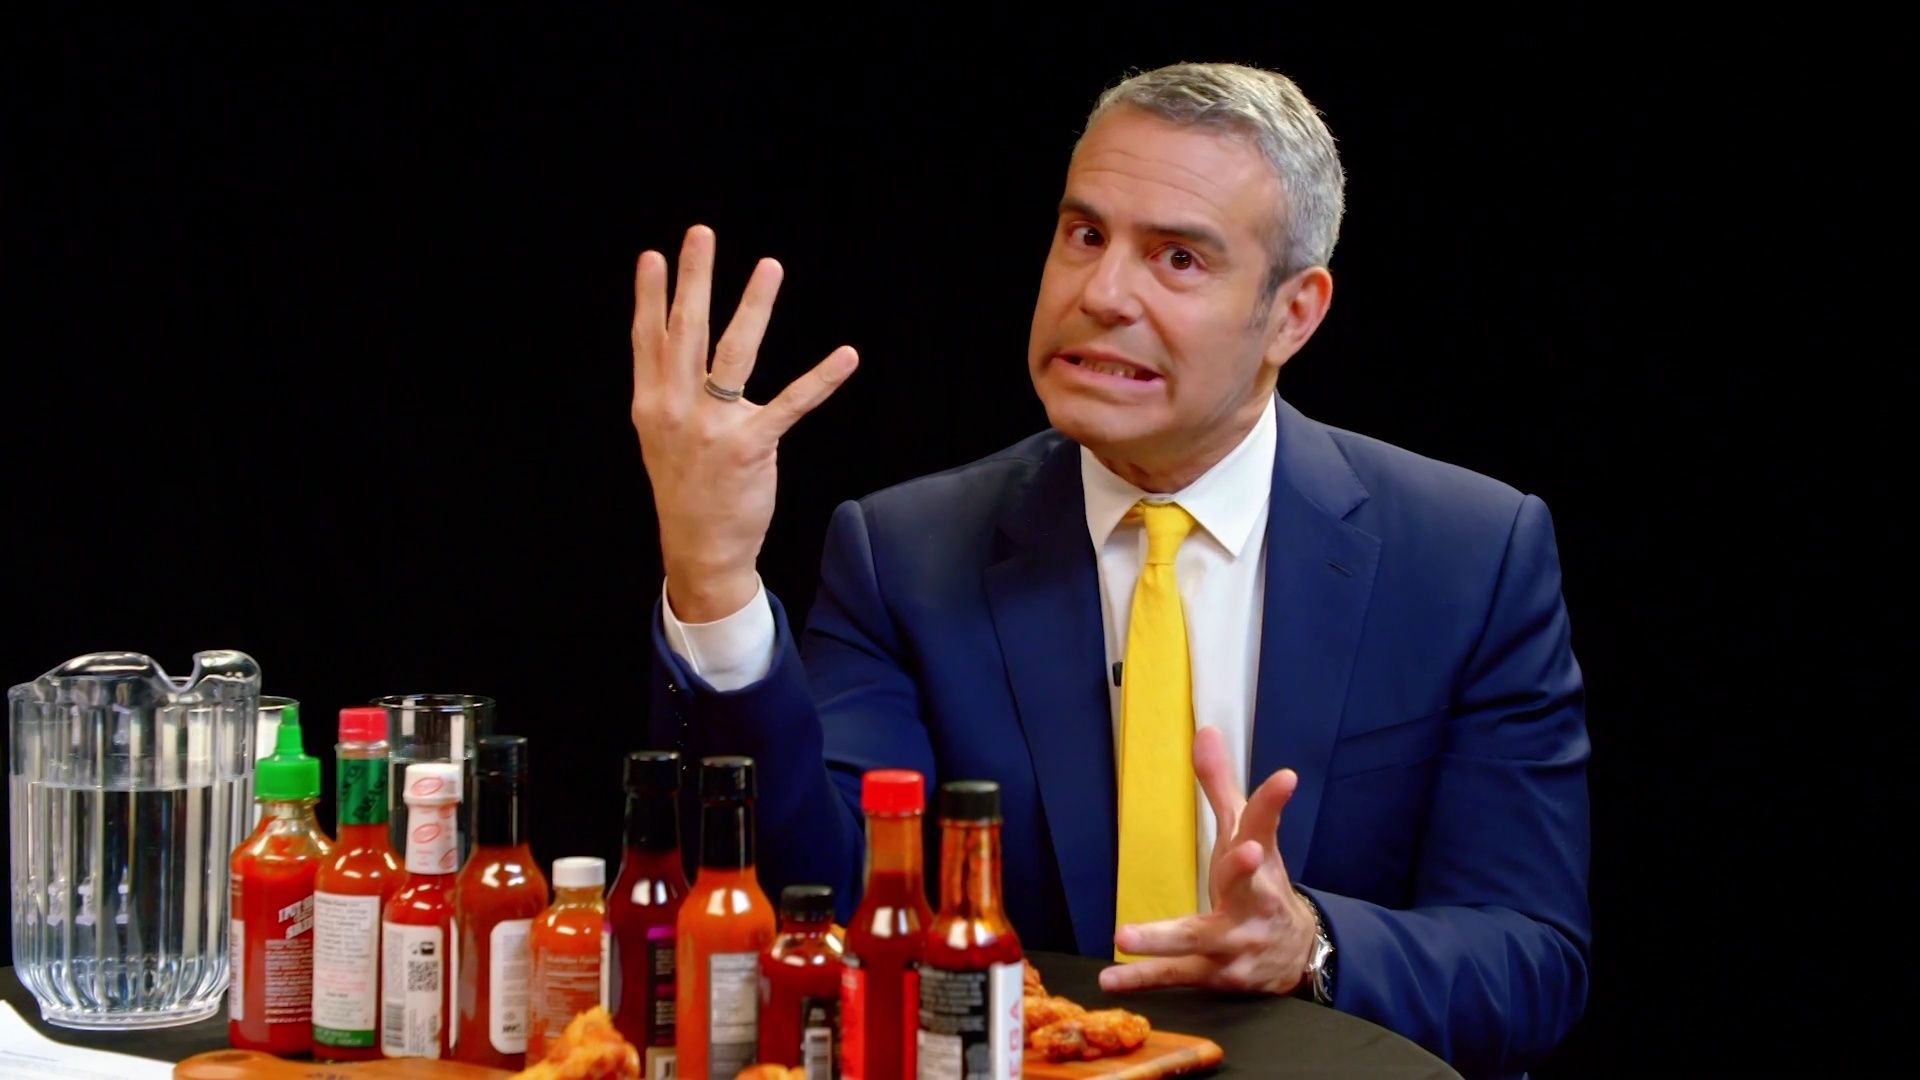 Andy Cohen Spills the Tea While Eating Spicy Wings